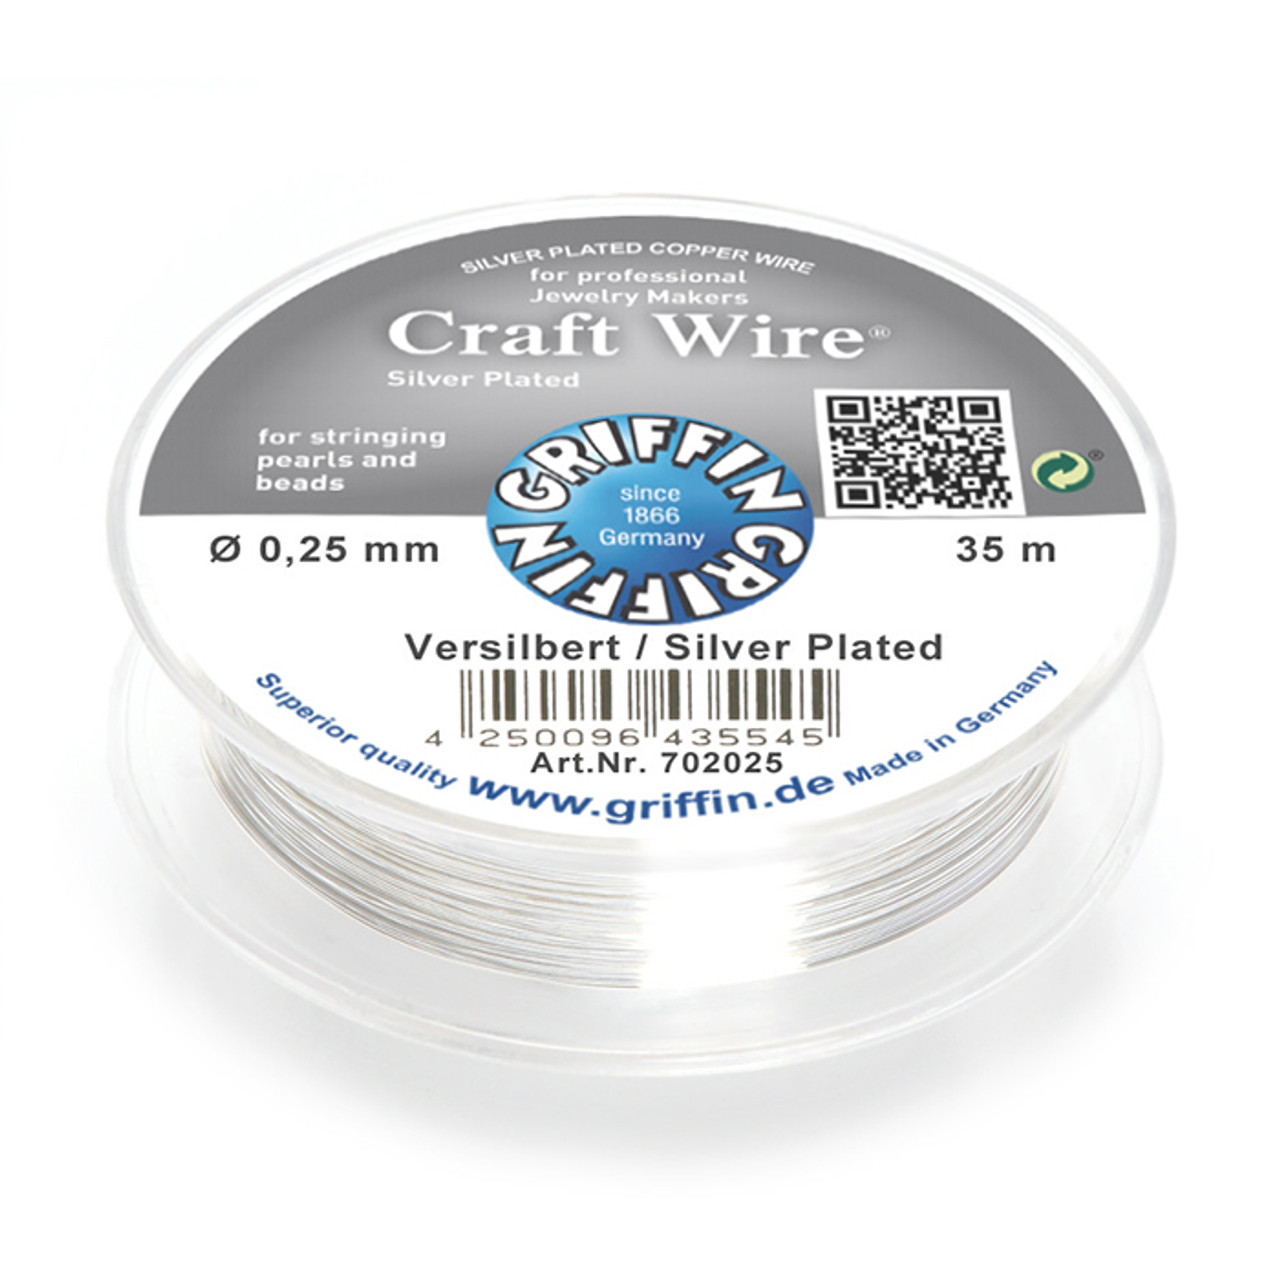 Craft Wire silver plated 0,25mm; spool of 35m